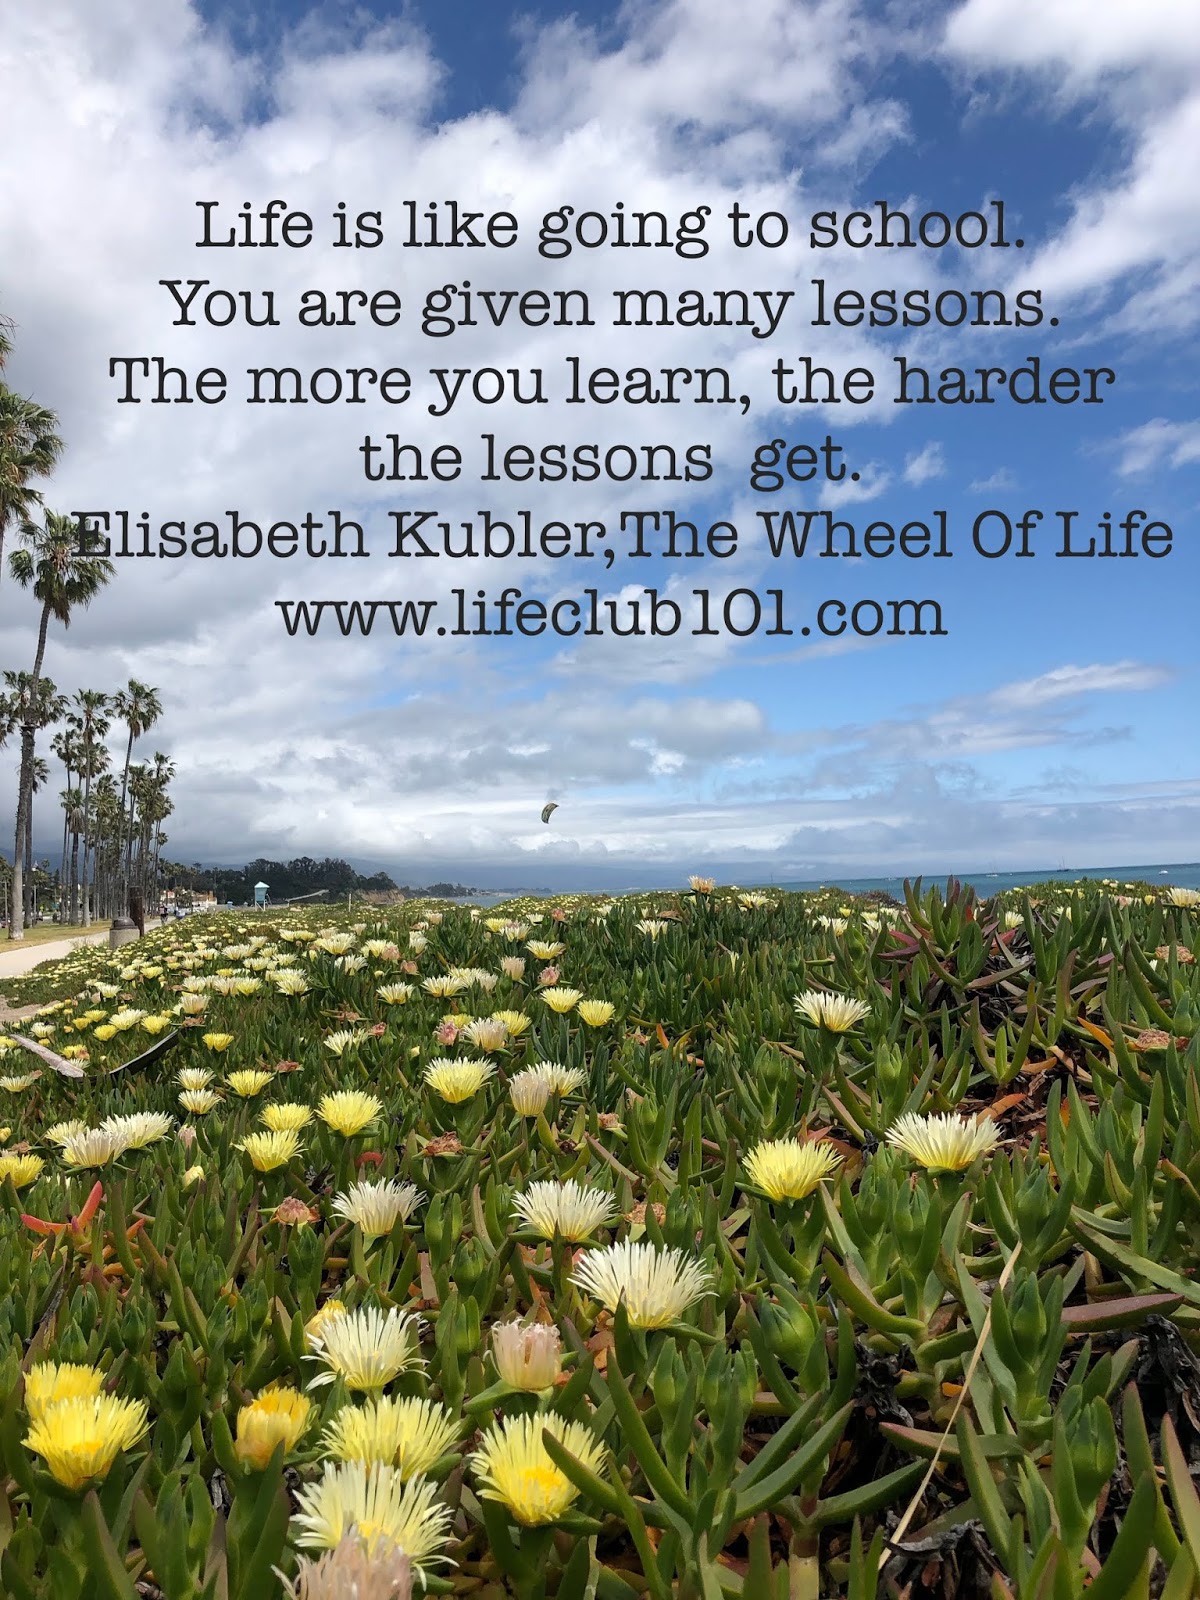 Lesson learned quotes, Lessons learned in life, Learning quotes